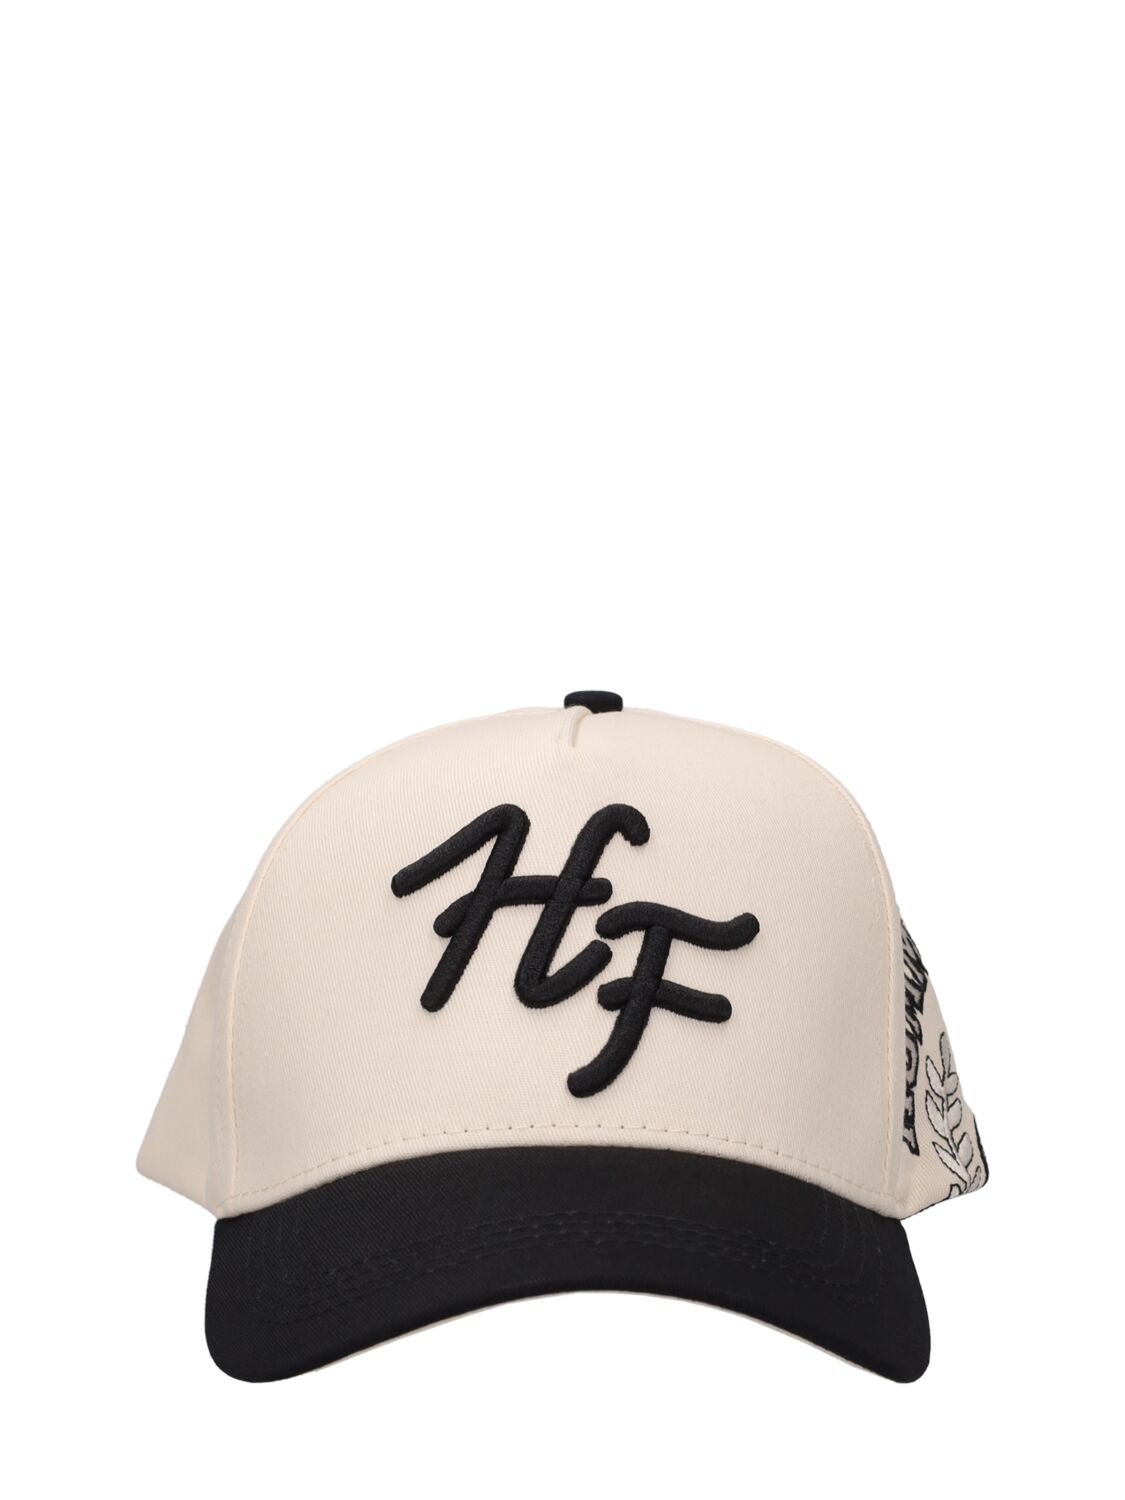 Initial Snapback Cotton Hat